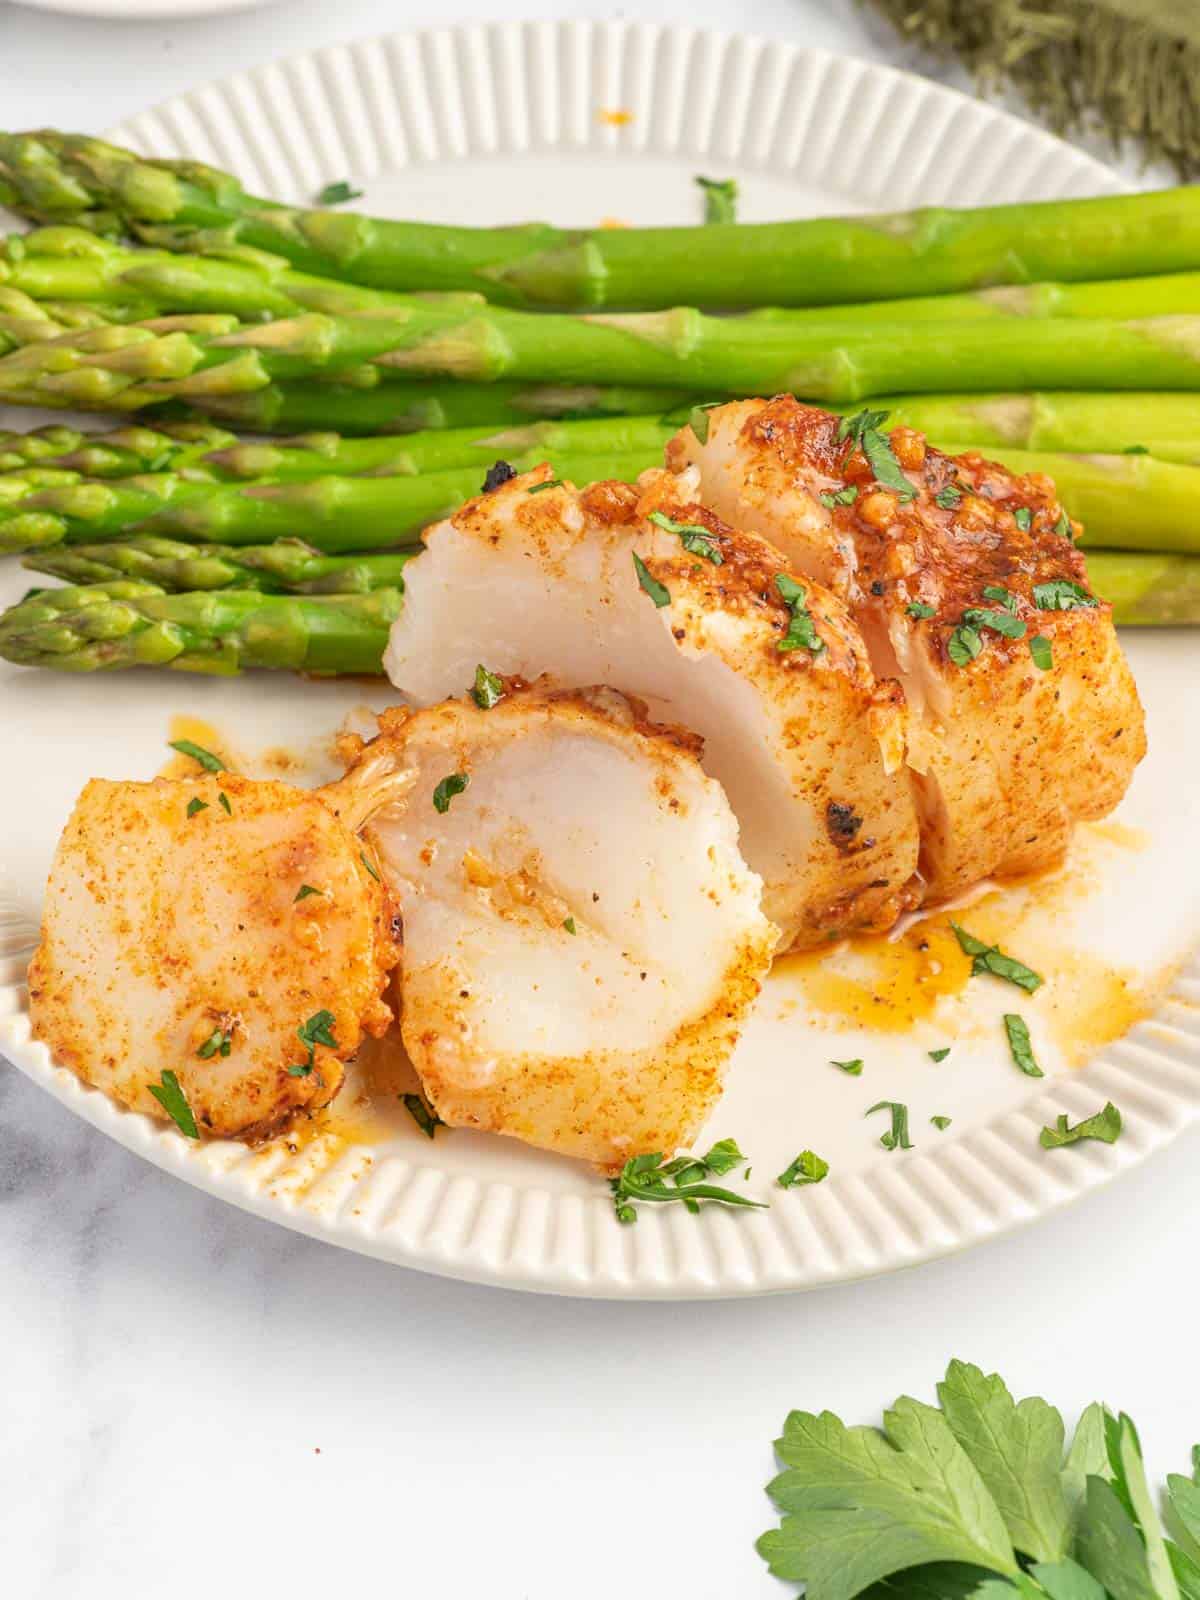 Flaked cod filets on a plate with asparagus.